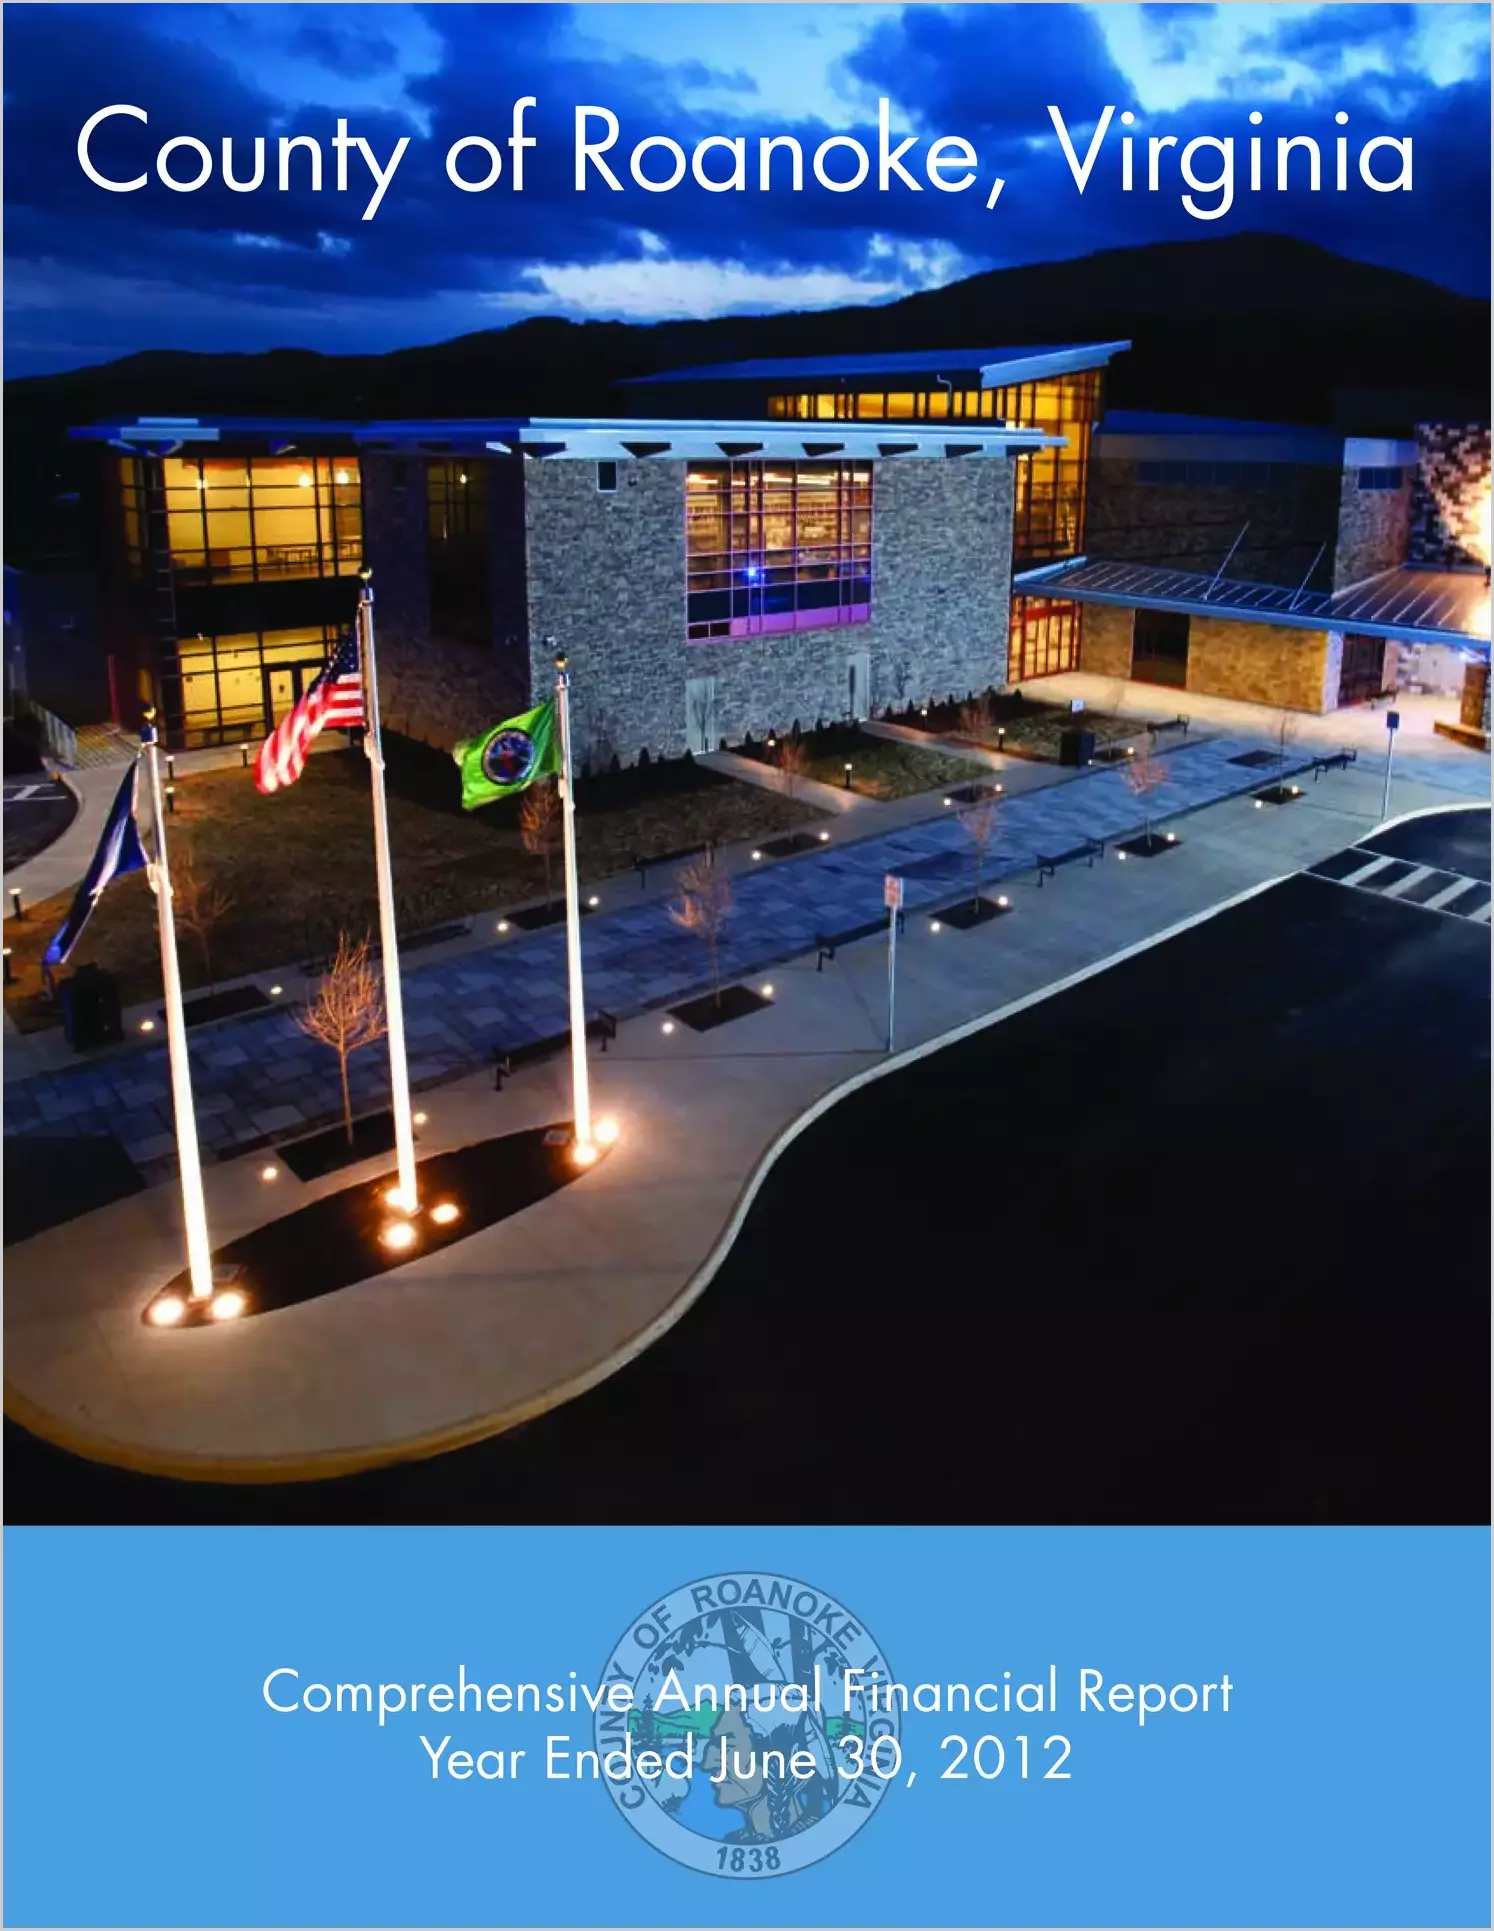 2012 Annual Financial Report for County of Roanoke